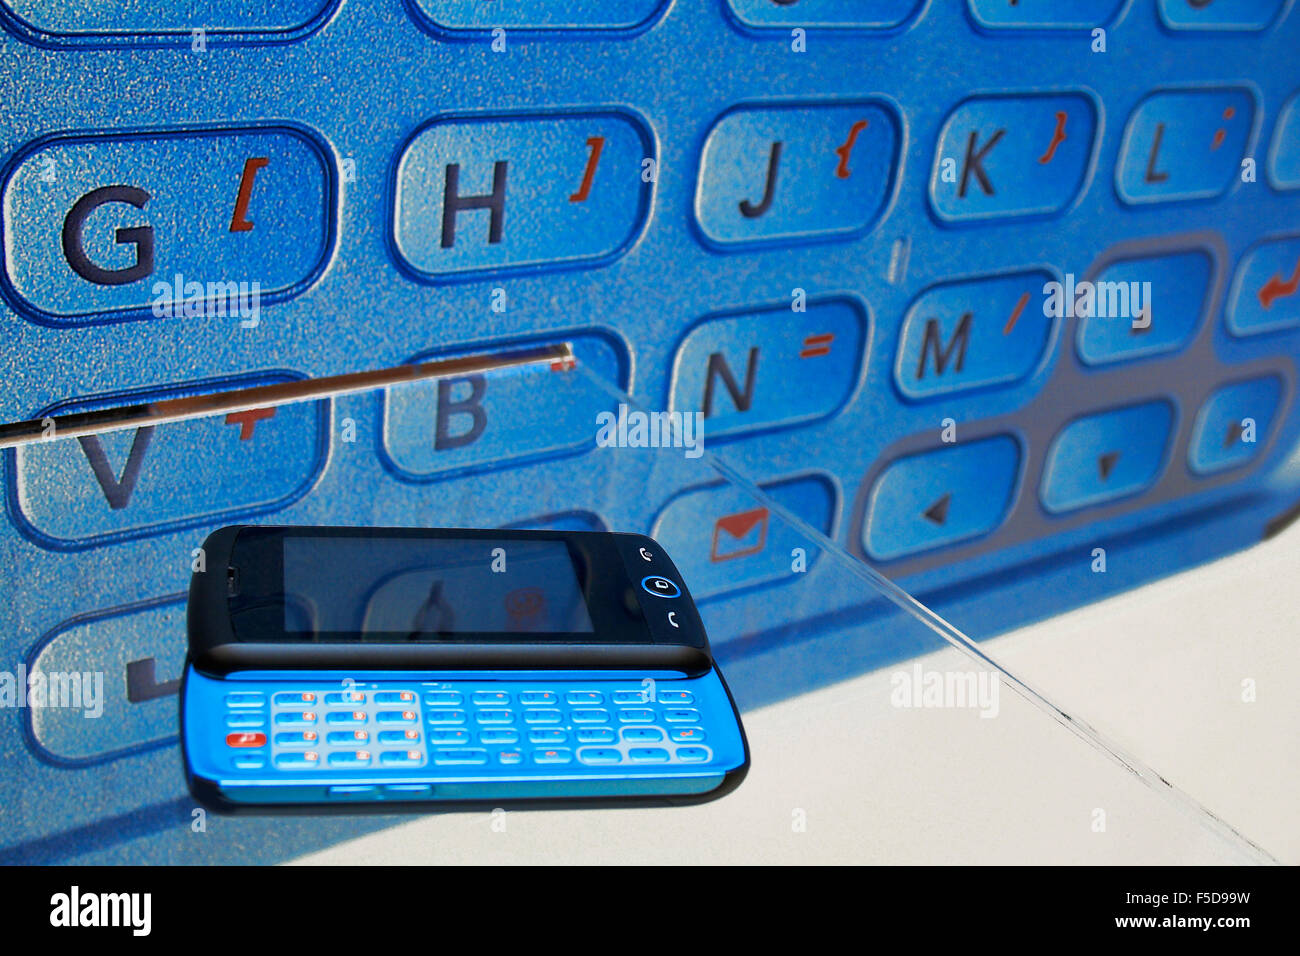 Mobile phone and palmtop against keyboard image with letters and functions Stock Photo